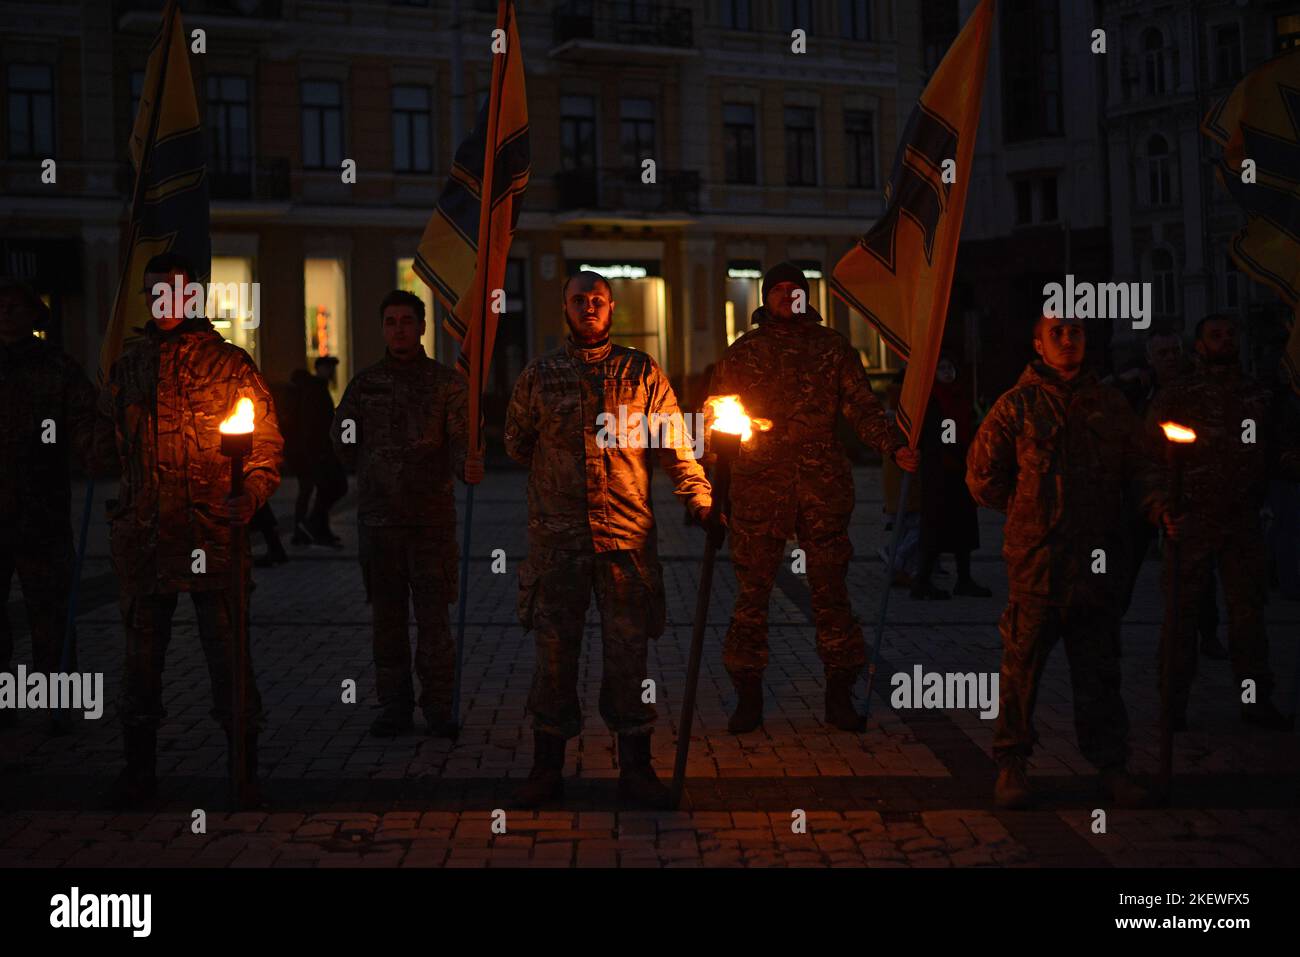 KYIV, UKRAINE - NOVEMBER 13, 2022 - Soldiers of Azov regiment hold flags and burning torches to commemorate their fallen brothers in arms during the Heavenly Regiment of Azov mystery in Sofiyska Square, Kyiv, capital of Ukraine. Stock Photo